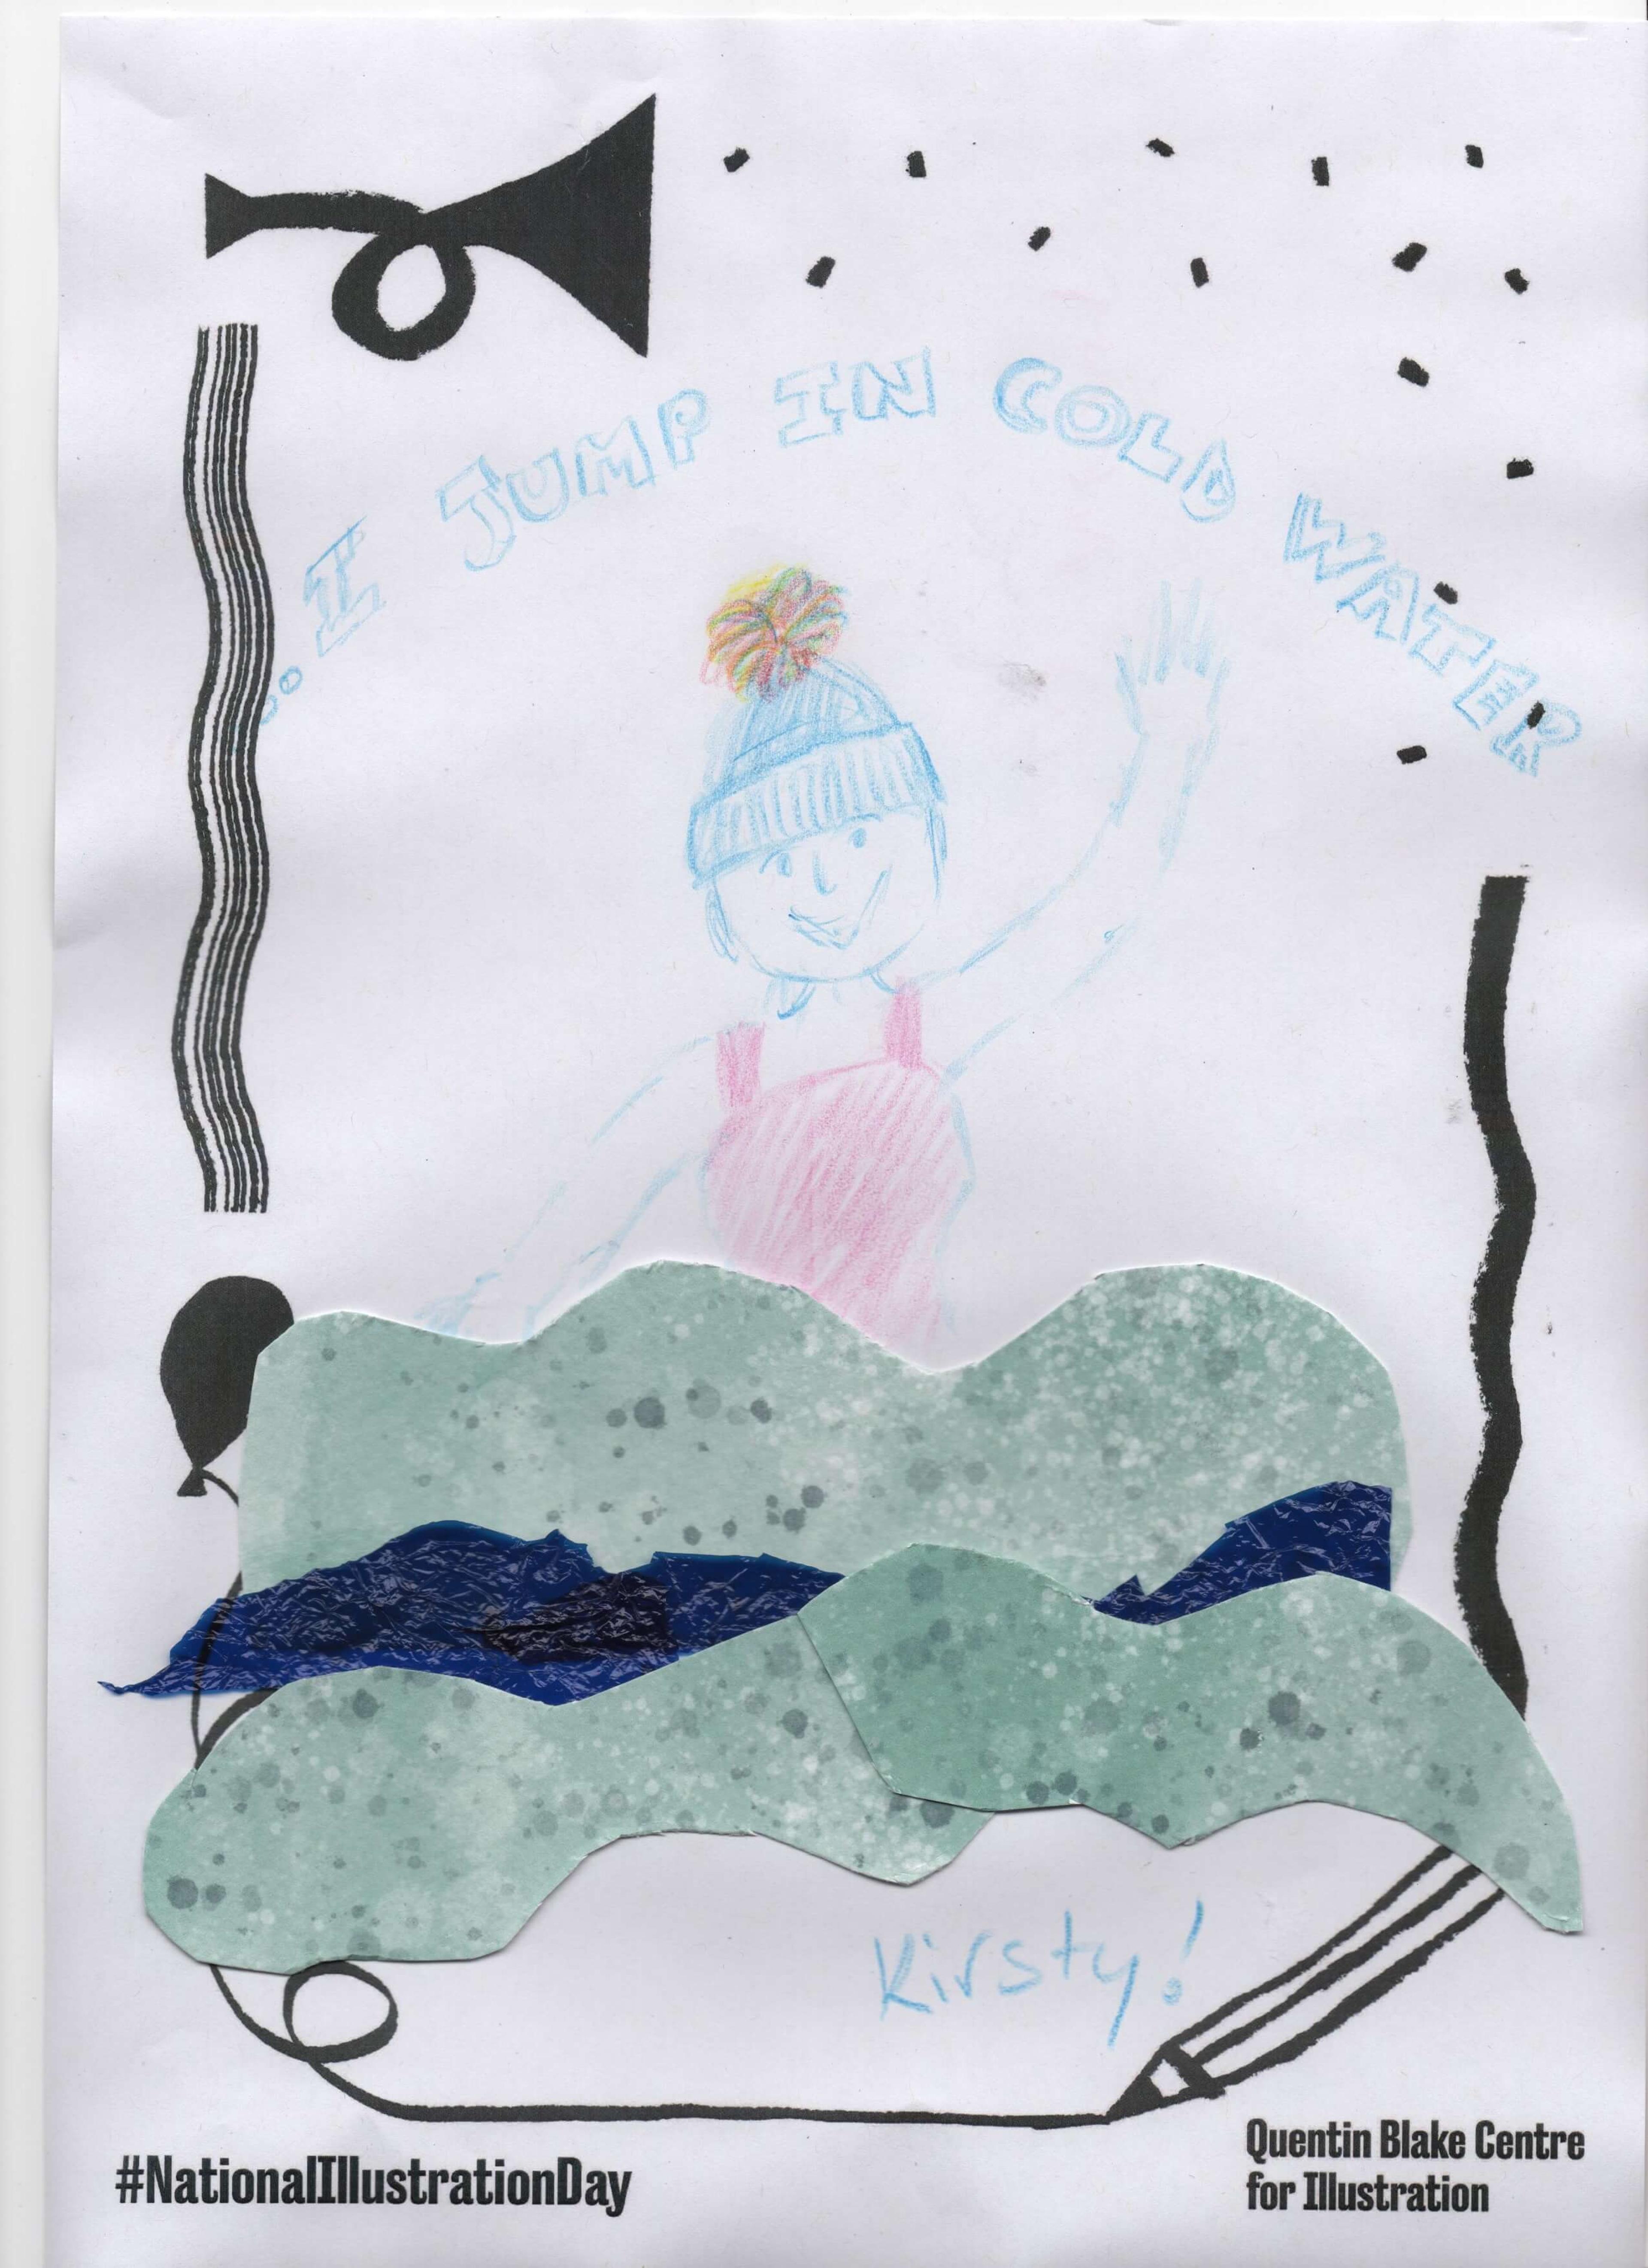 Colour pencil drawing of a smiling person in collaged water. The picture includes the words "I jump in cold water" written in all-caps. 